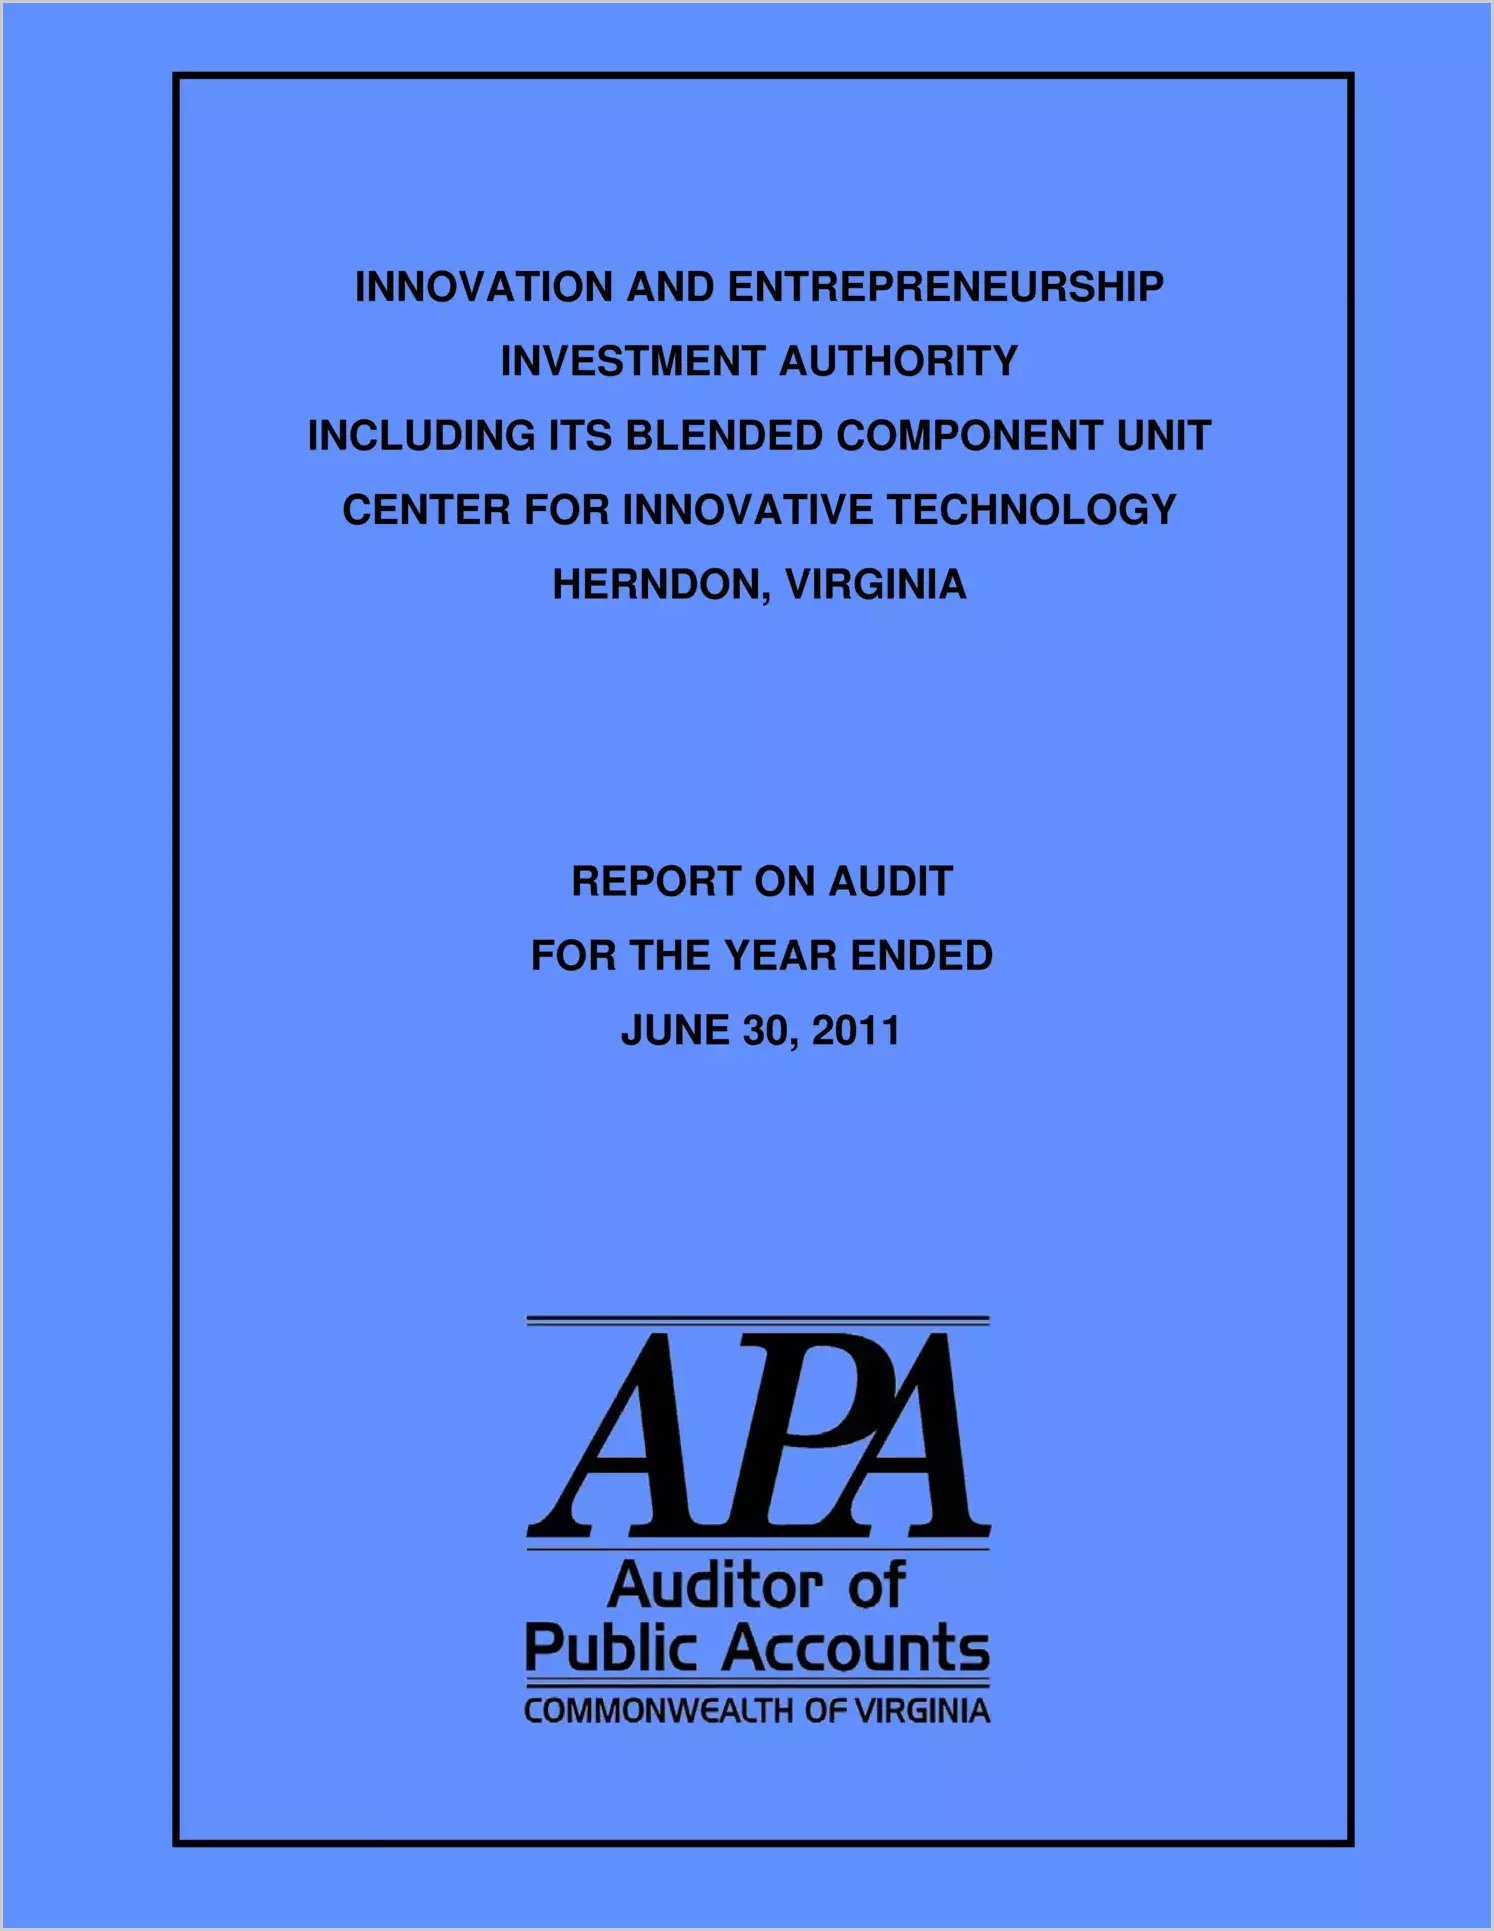 Innovation and Entrepreneurship Investment Authority Including Its Blended Component Unit Center for Innovative Technology for the year ended June 30, 2011